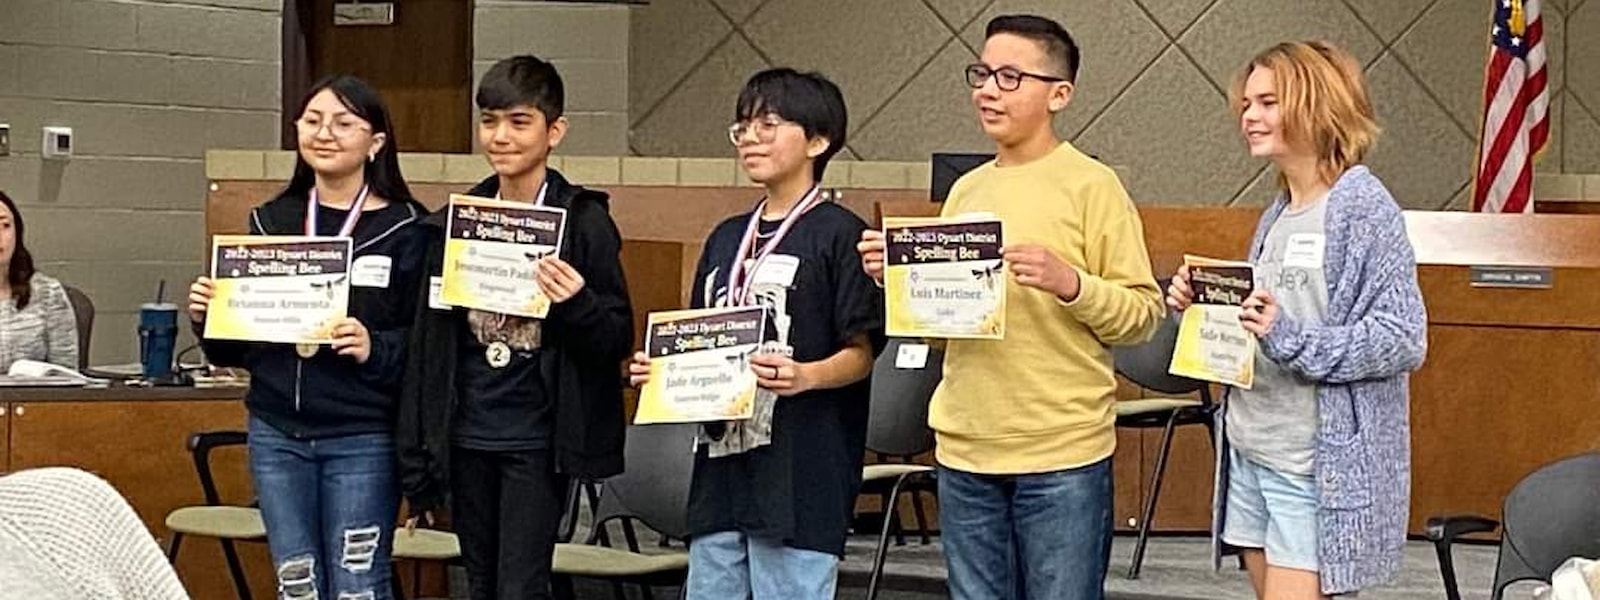 Students holding certificates at the Spelling Bee